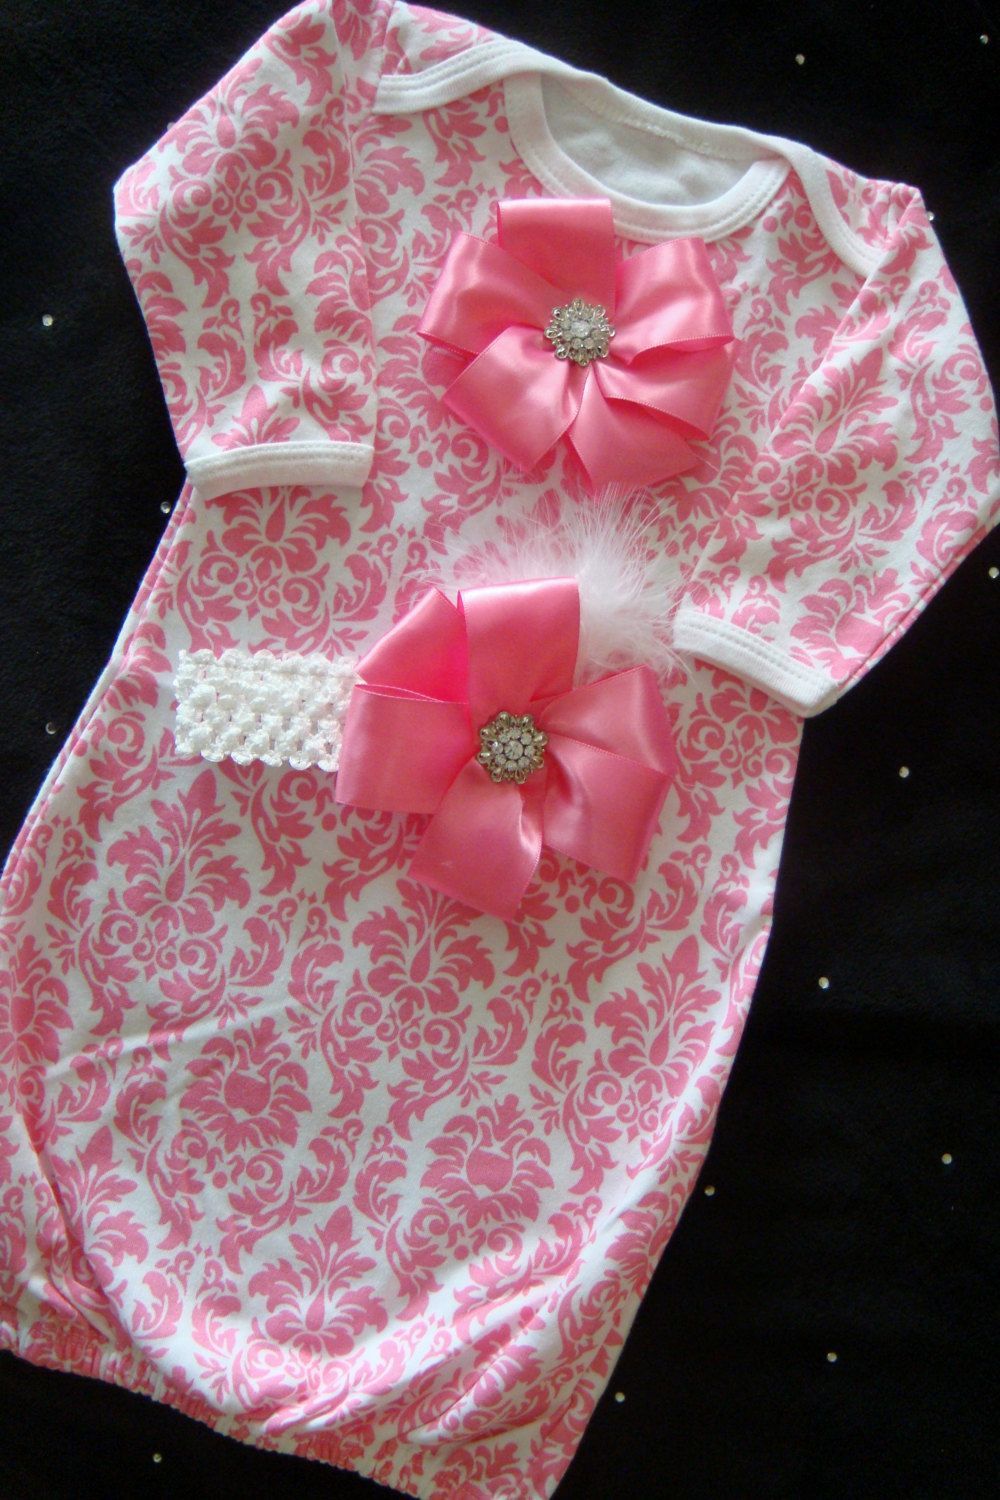 NEWBORN baby girl outfit  g